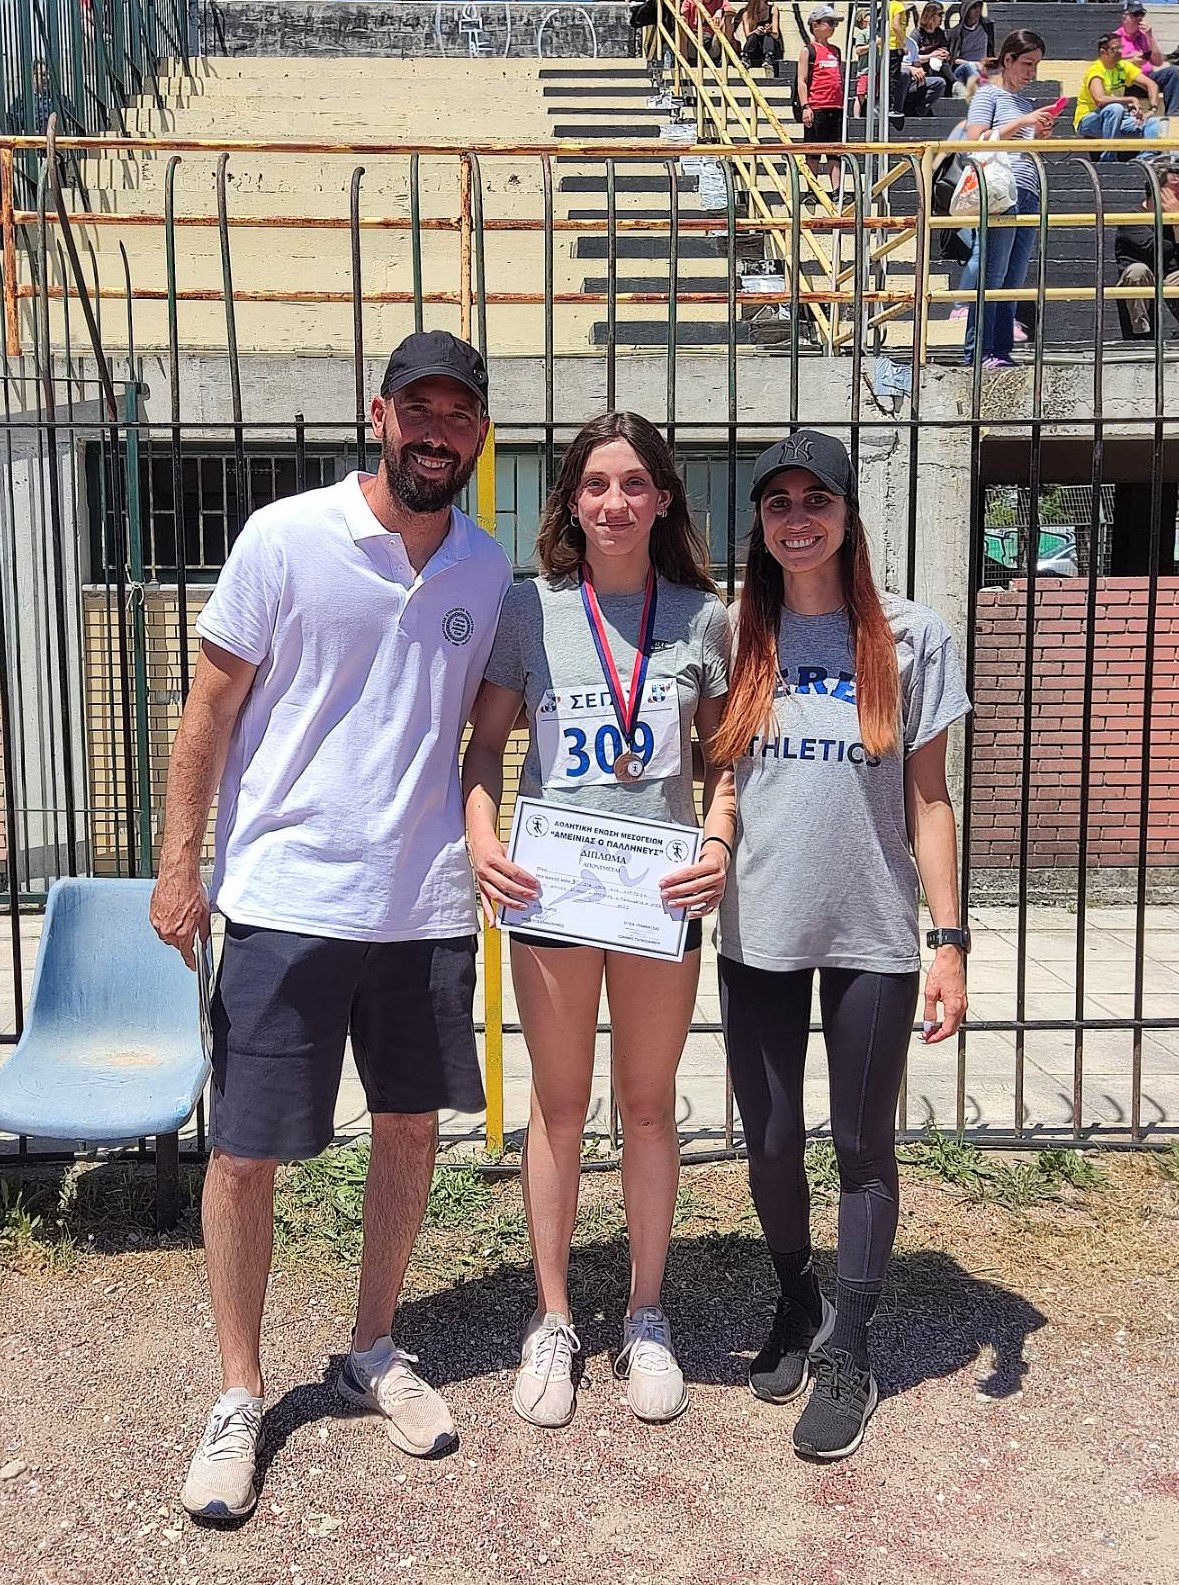 The Deree Track & Field Academy won 4 medals in the Track & Field Meeting “Aminias Pallineus 2022”.